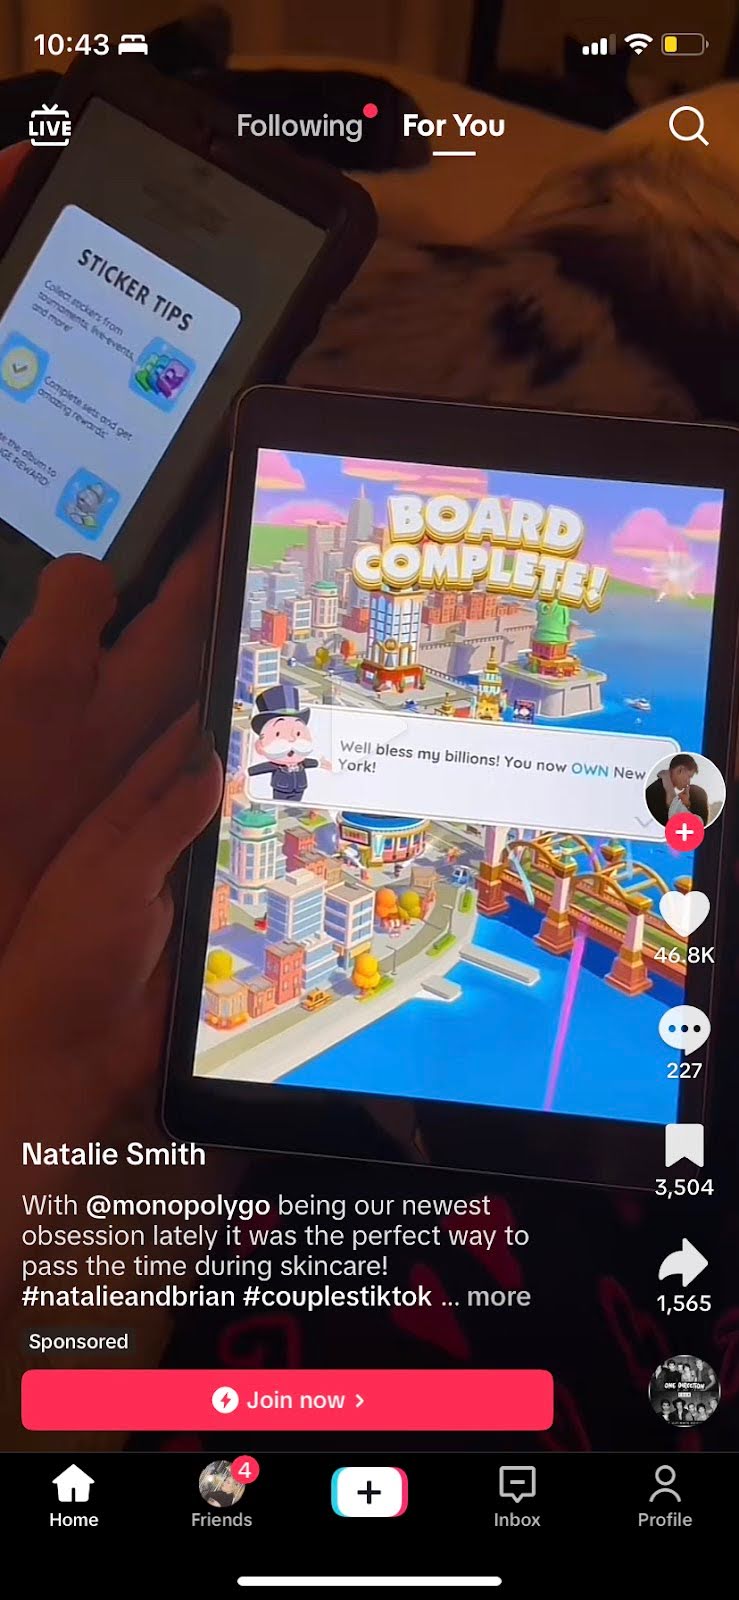 Monopoly Go TikTok ad creative where it partnered with creator Natalie Smith to create In-feed Video Ads promoting the game.